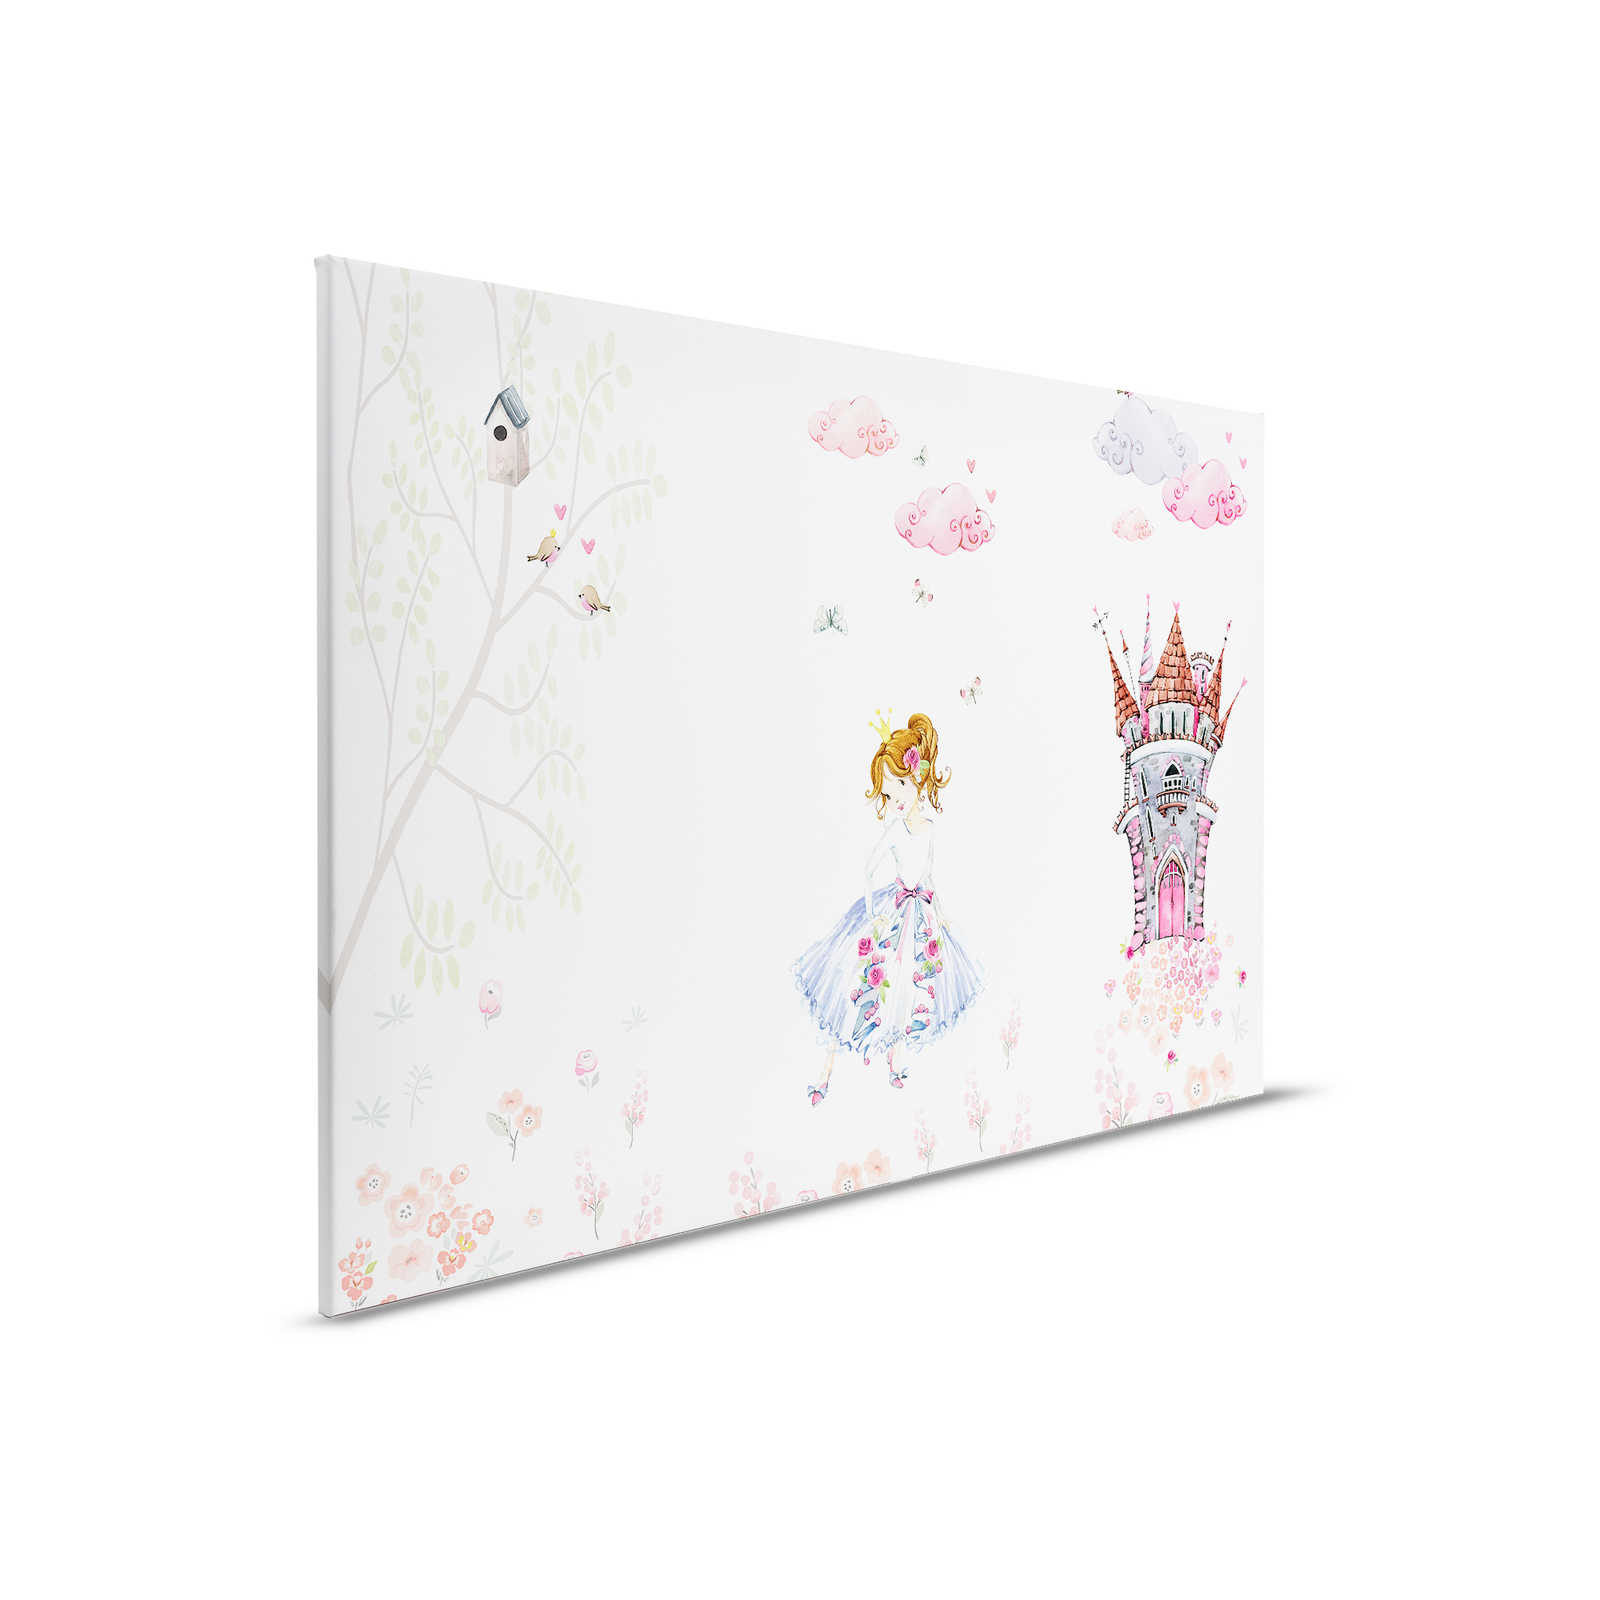         Canvas painting with princess in castle garden children's room - 0.90 m x 0.60 m
    